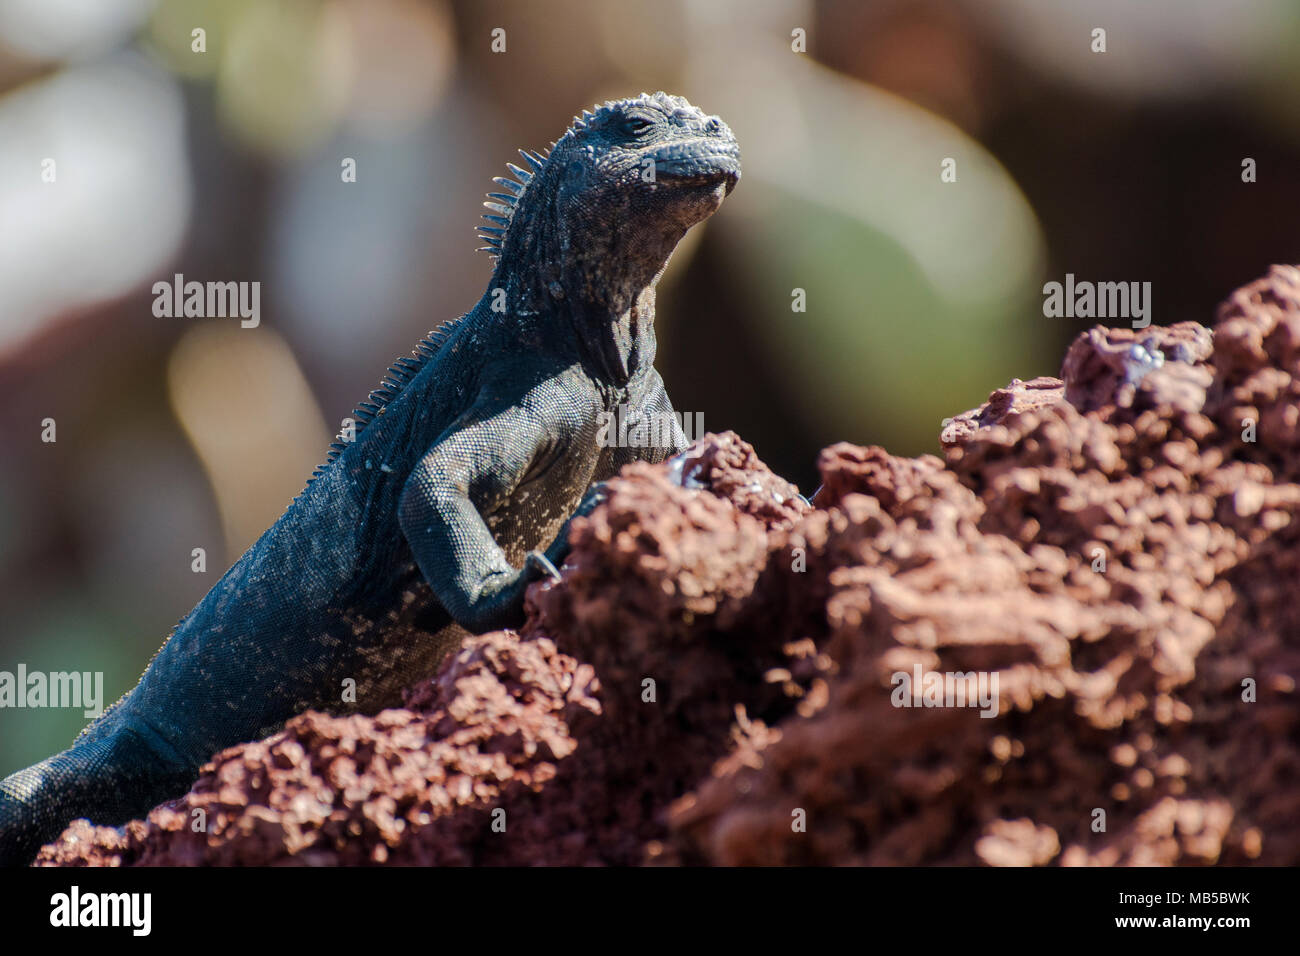 Subspecies of the galapagos marine iguana (Amblyrhynchus cristatus wikelskii), this subspecies is considered endangered and is found on Rabida island. Stock Photo